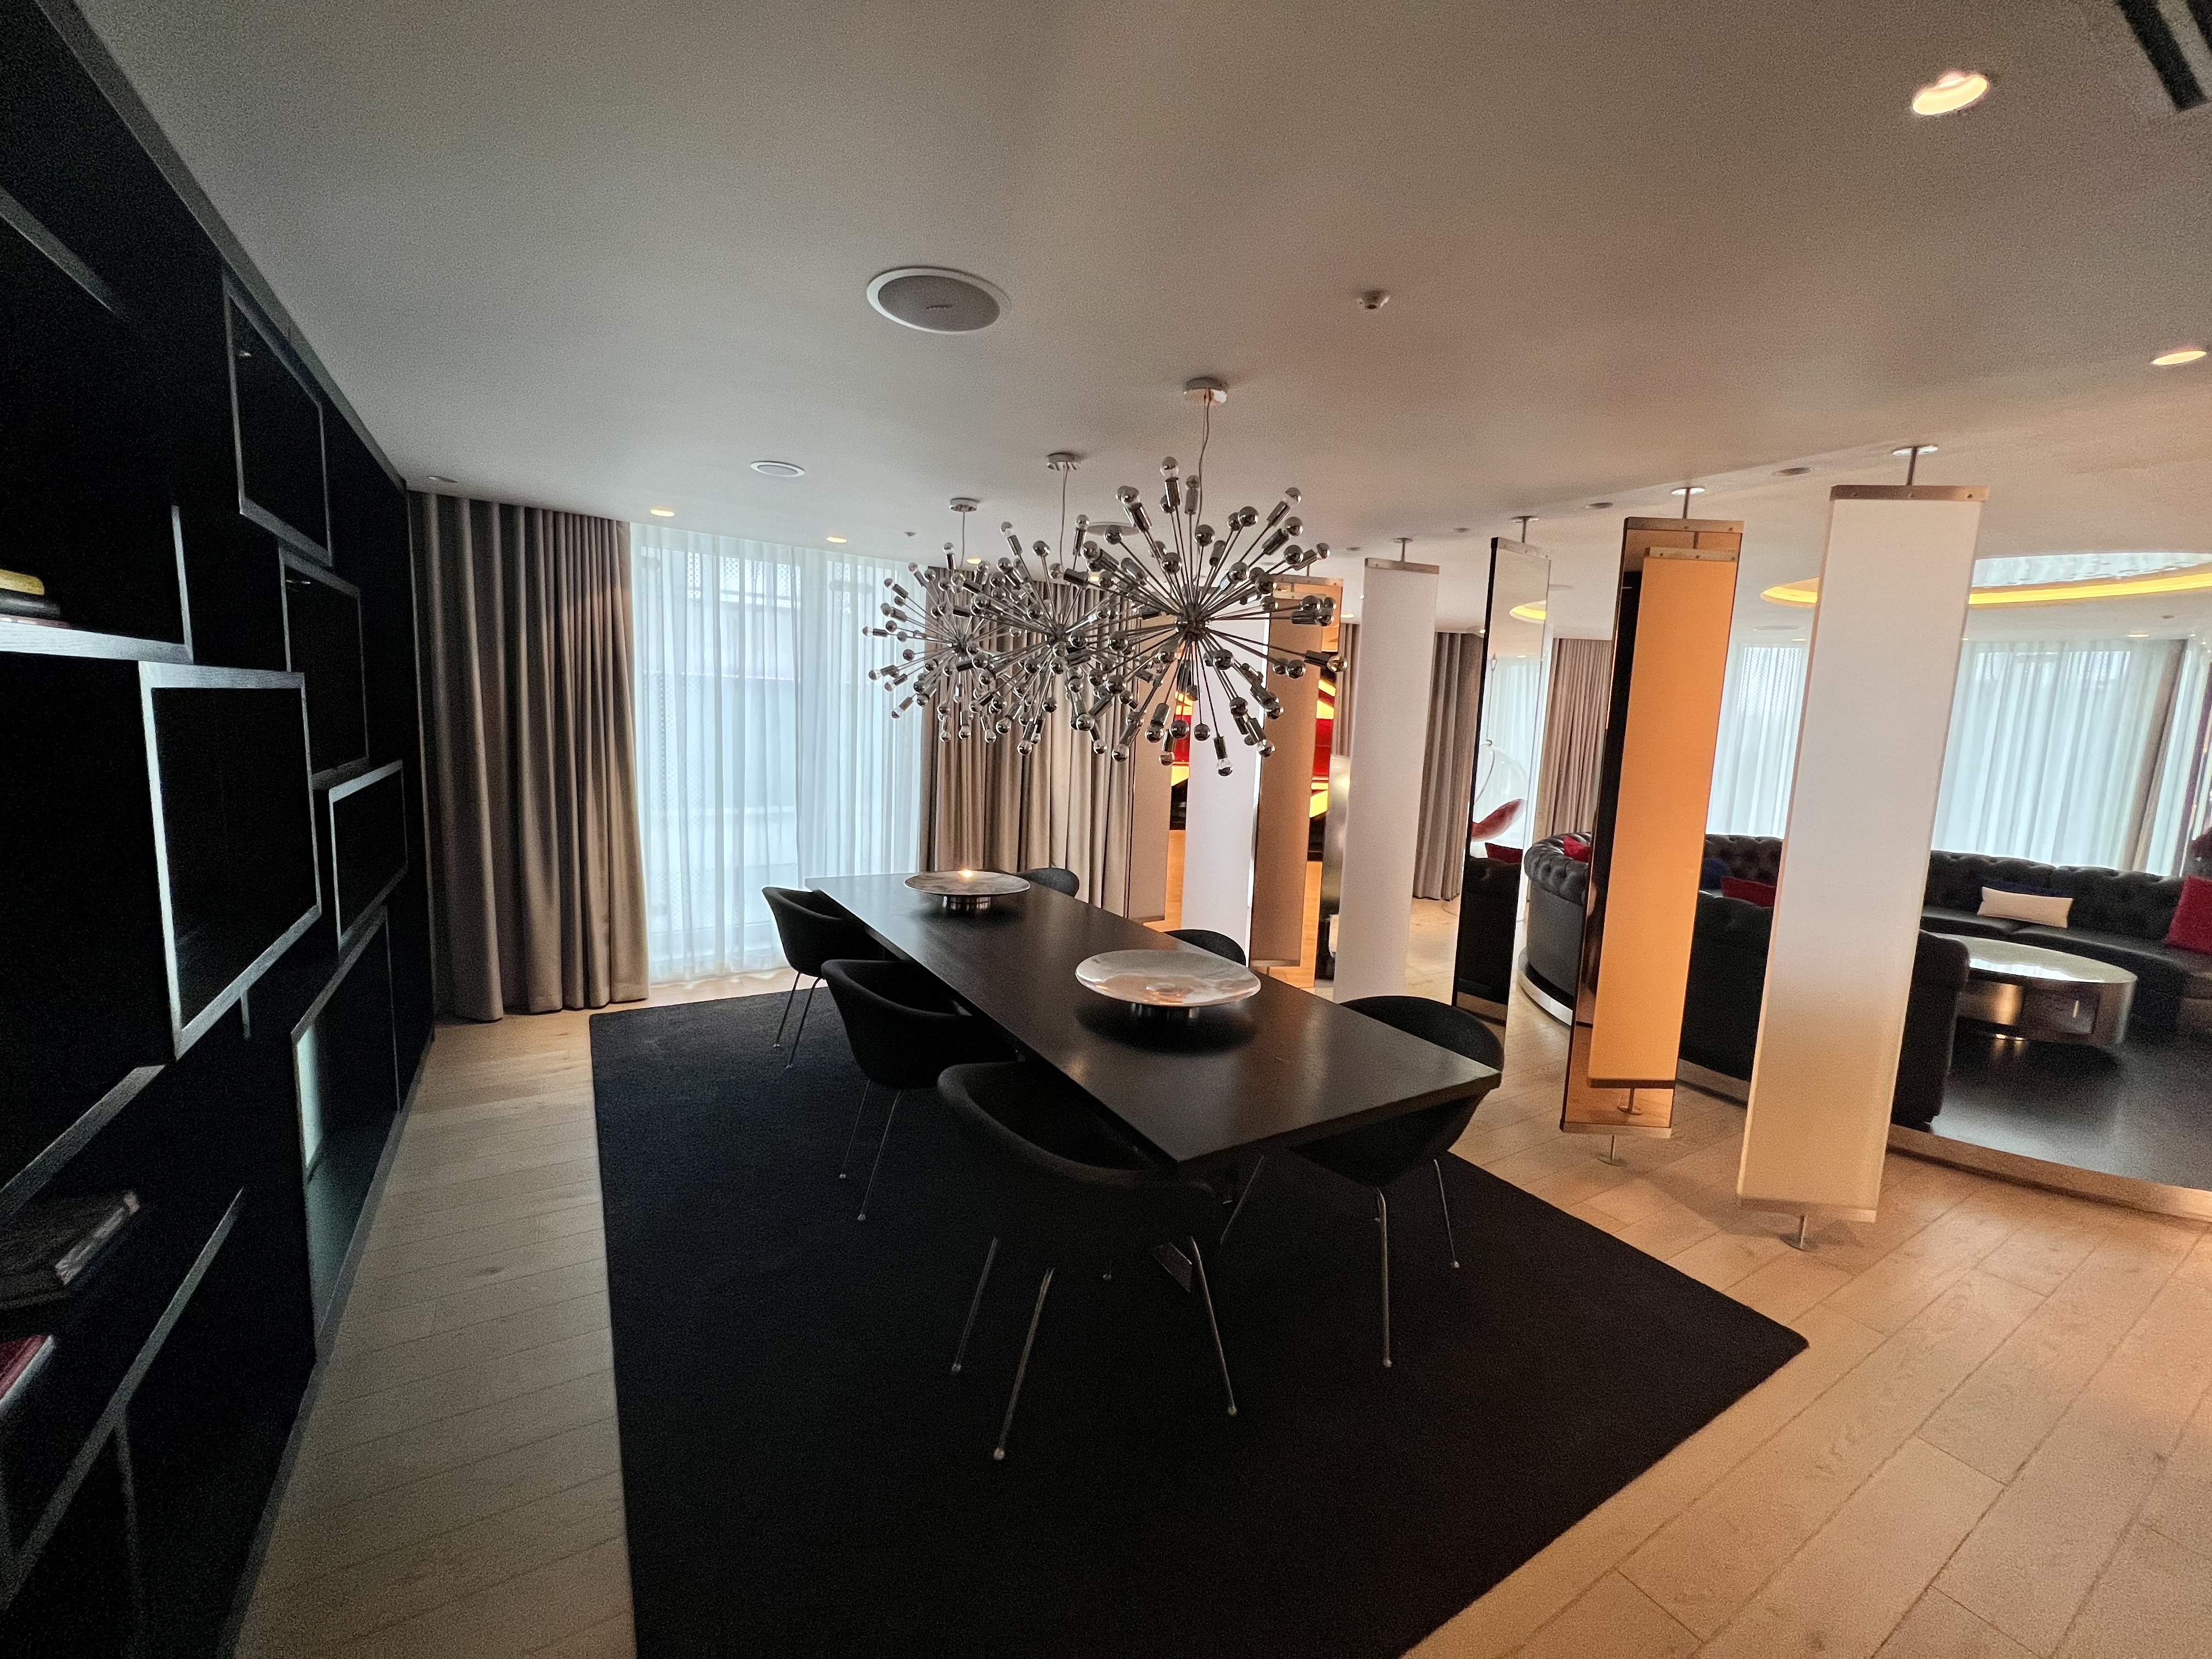  Wҫ Extreme WOW Suite, Penthouse, W London